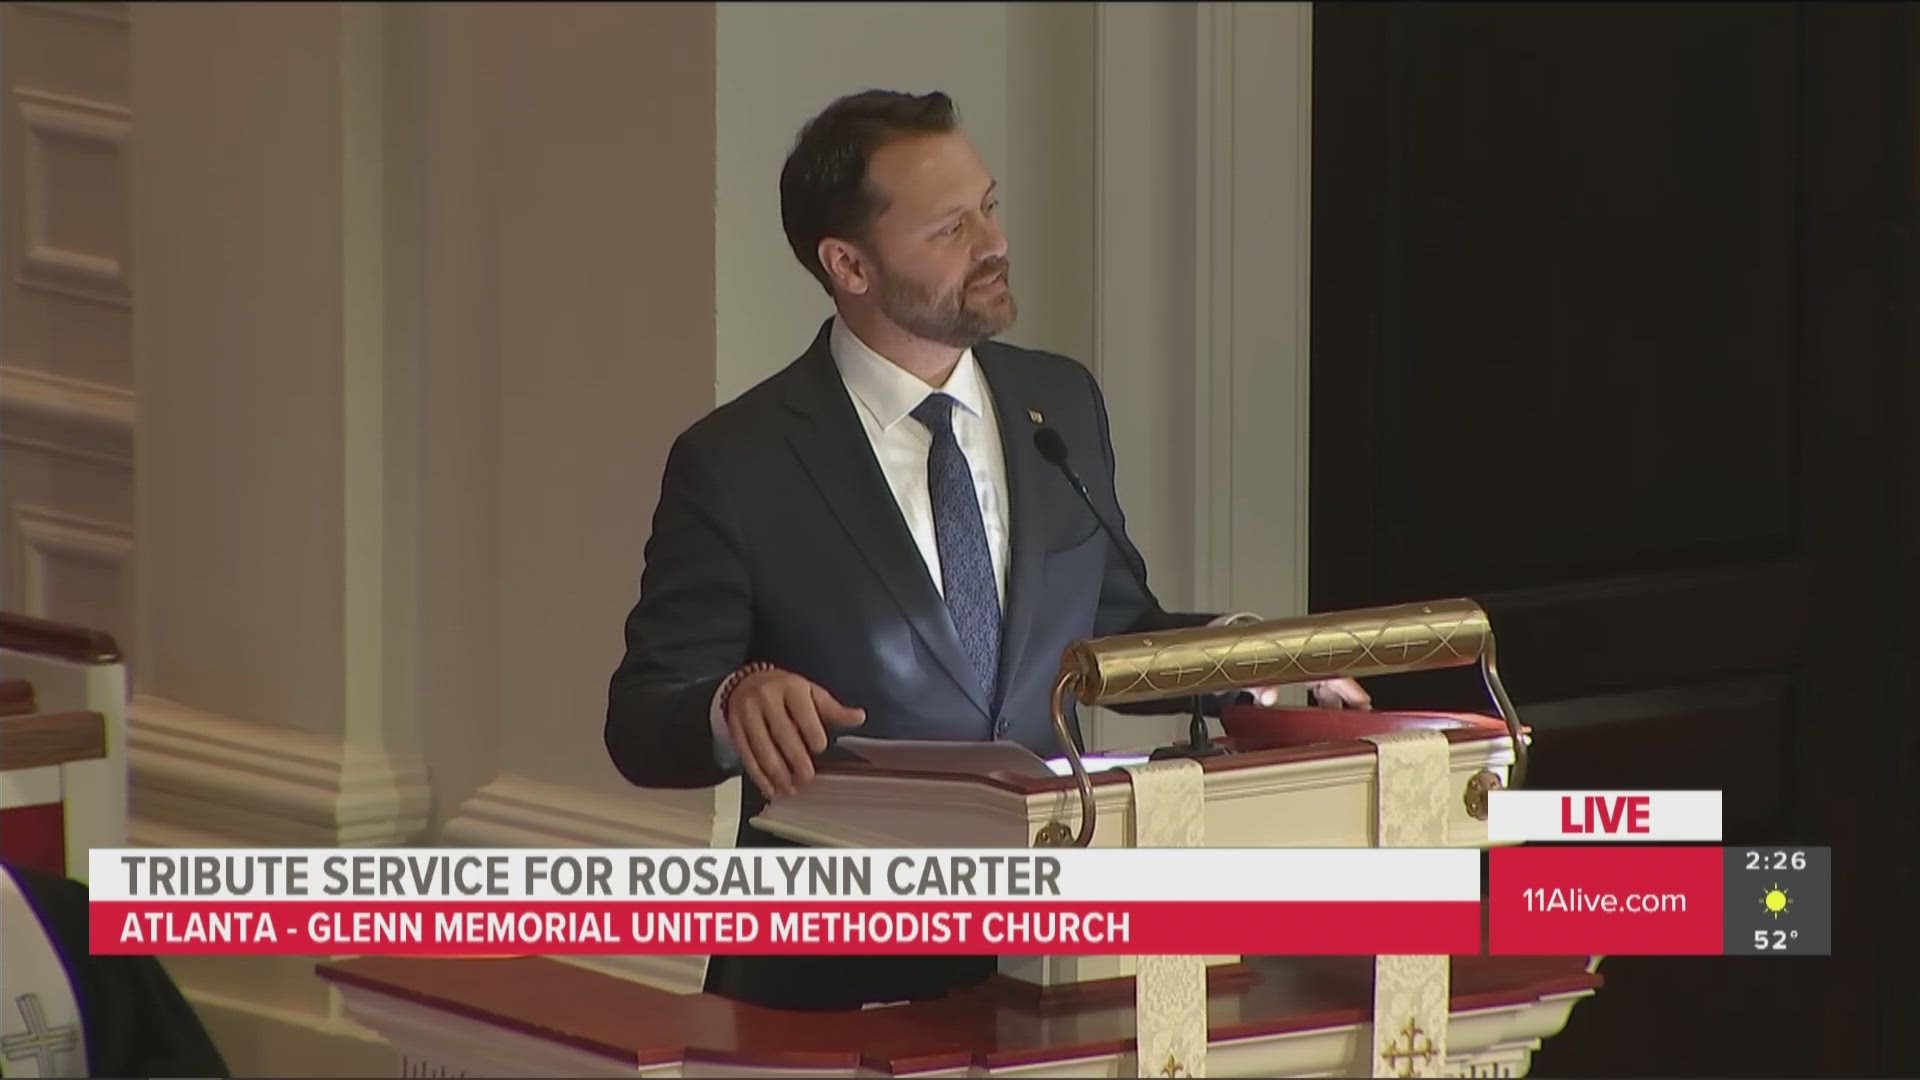 Calling her down to earth, her grandson humorously shared how Rosalynn Carter was a 'cool grandmother.'